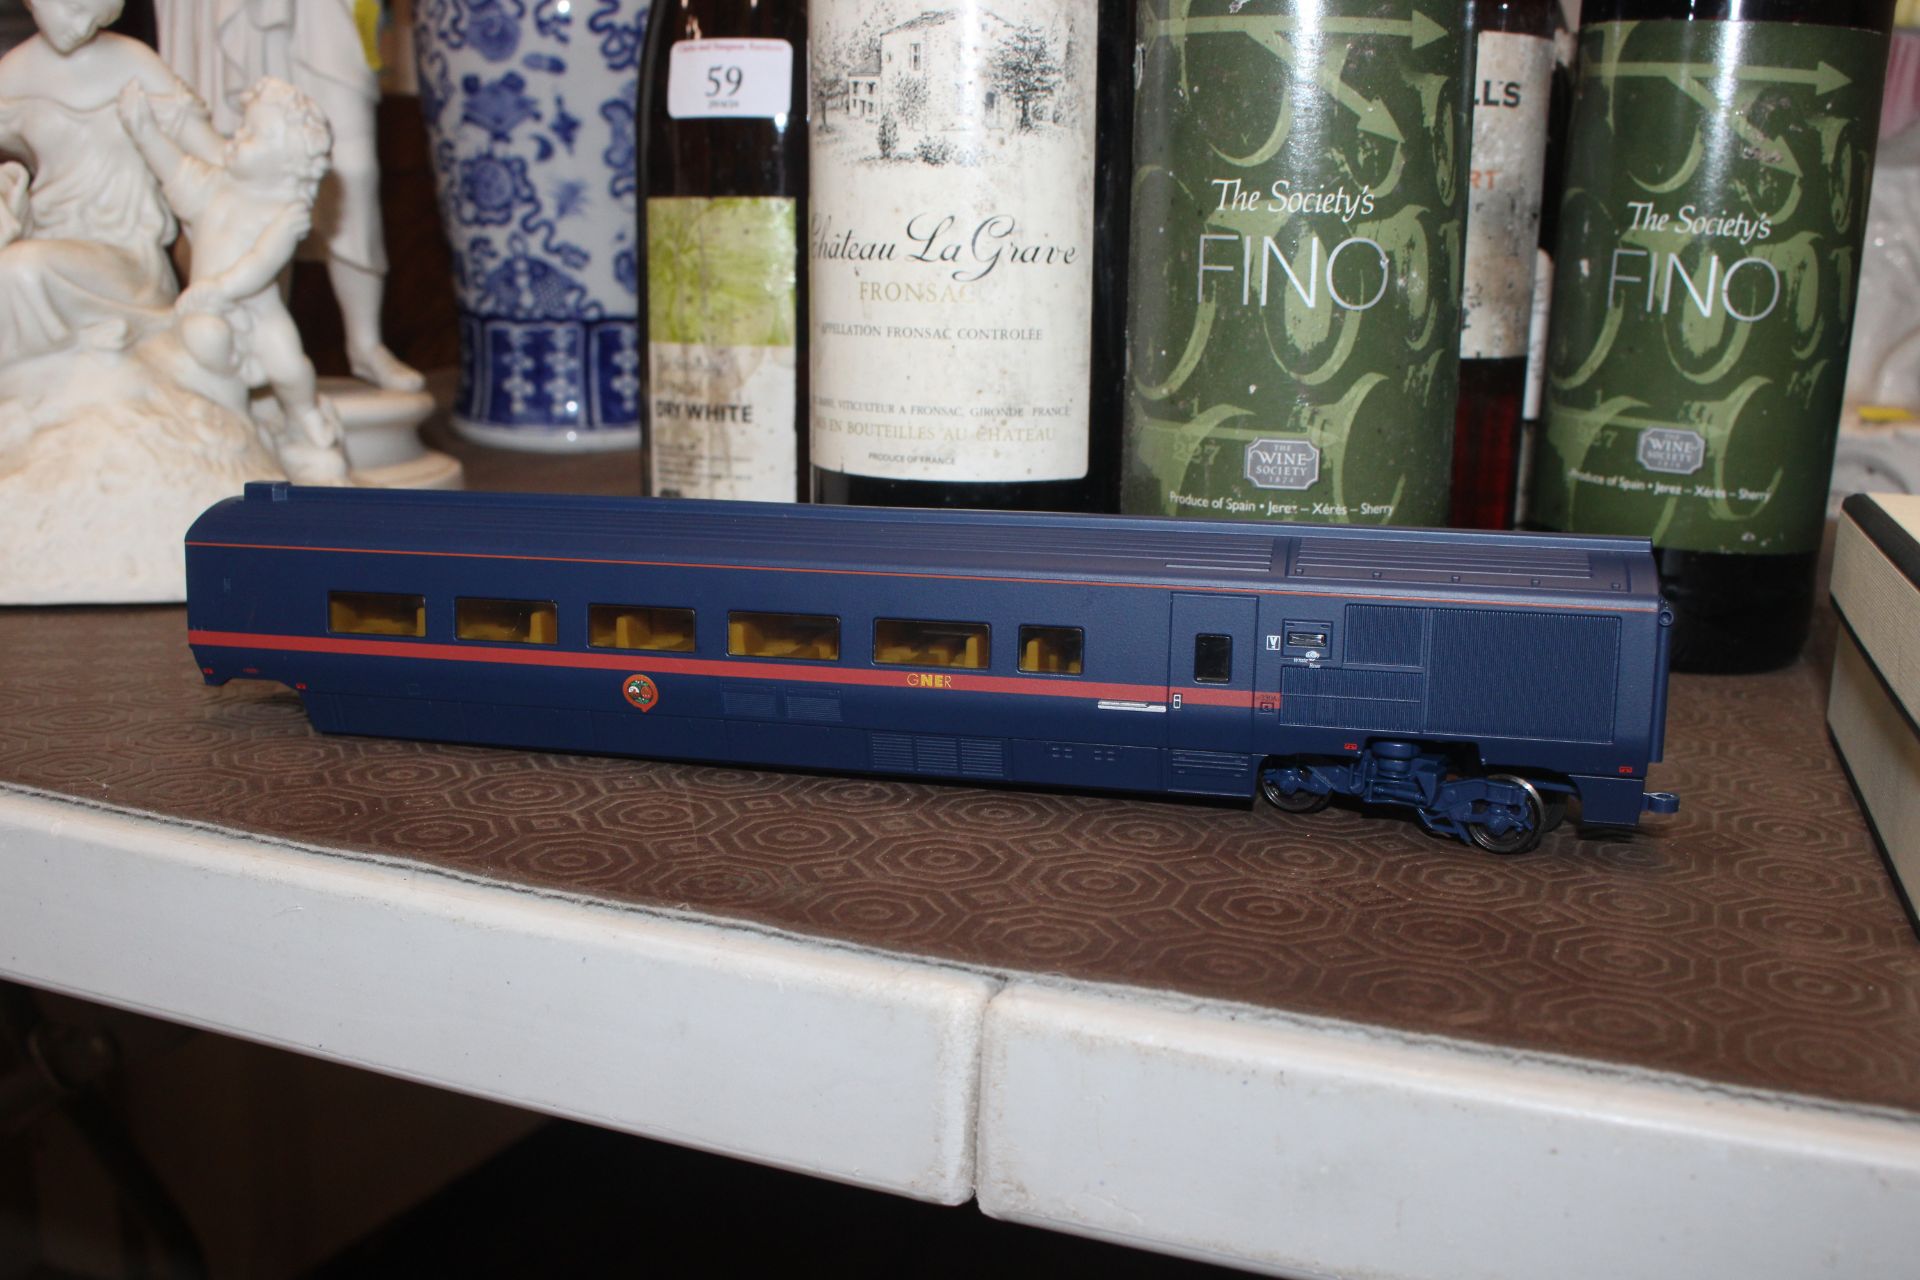 Two Hornby GNER 3306 locomotives; and carriages; and a LMS 6223 locomotive "Princess Alice" and - Image 26 of 34